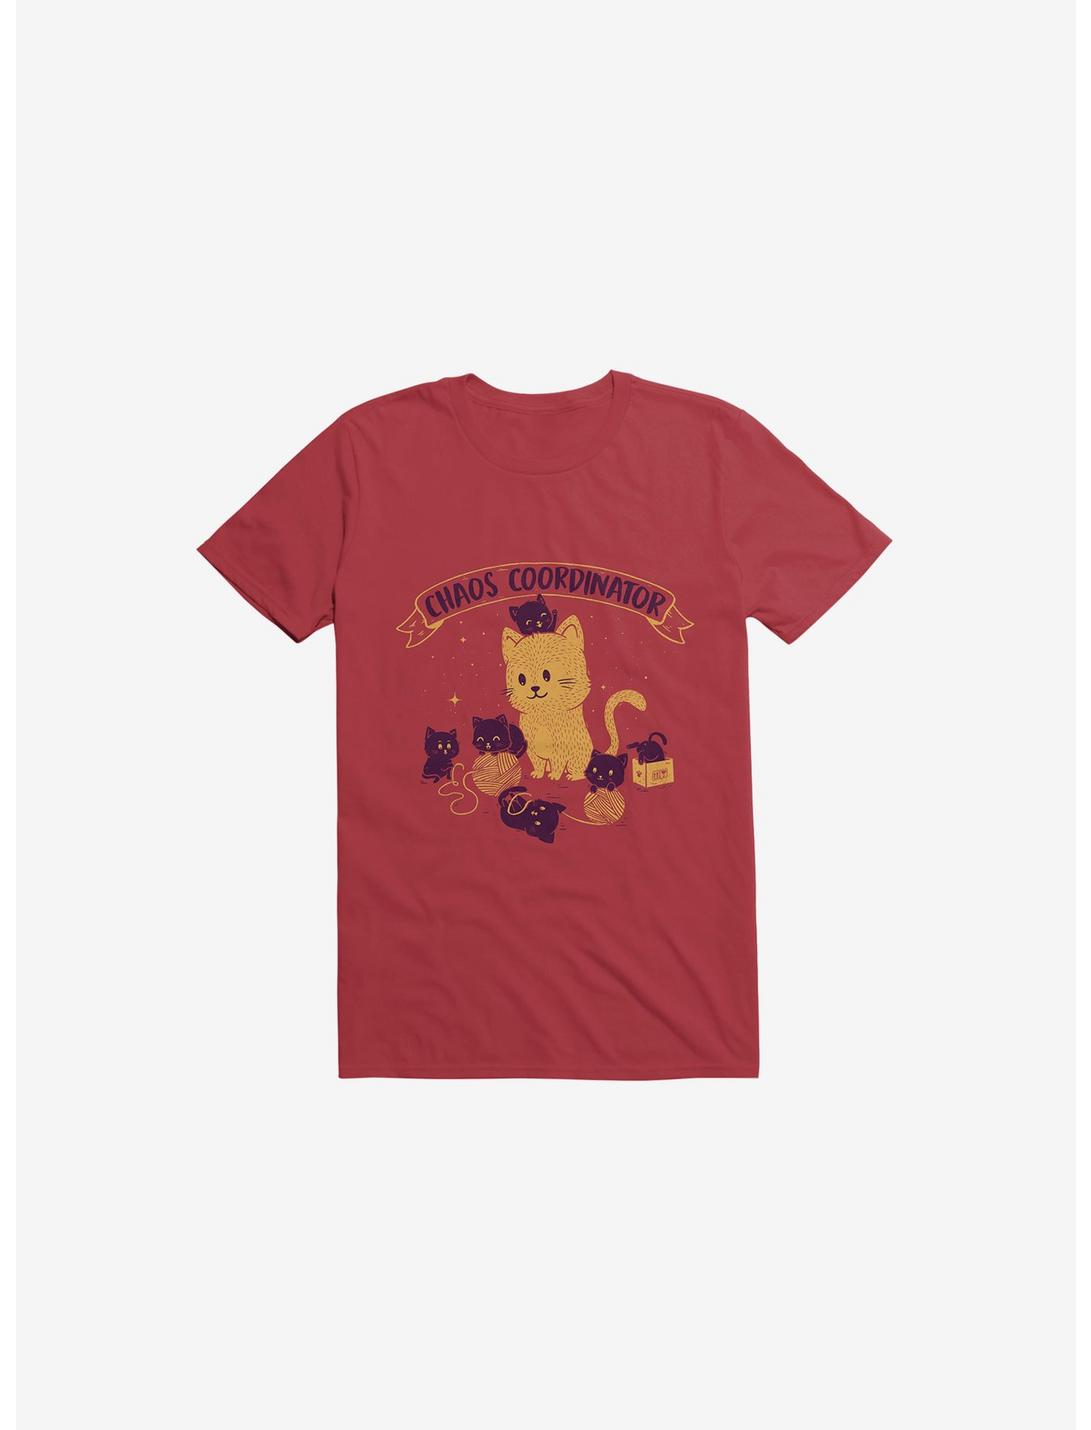 Chaos Coordinator Cat Red T-Shirt, RED, hi-res